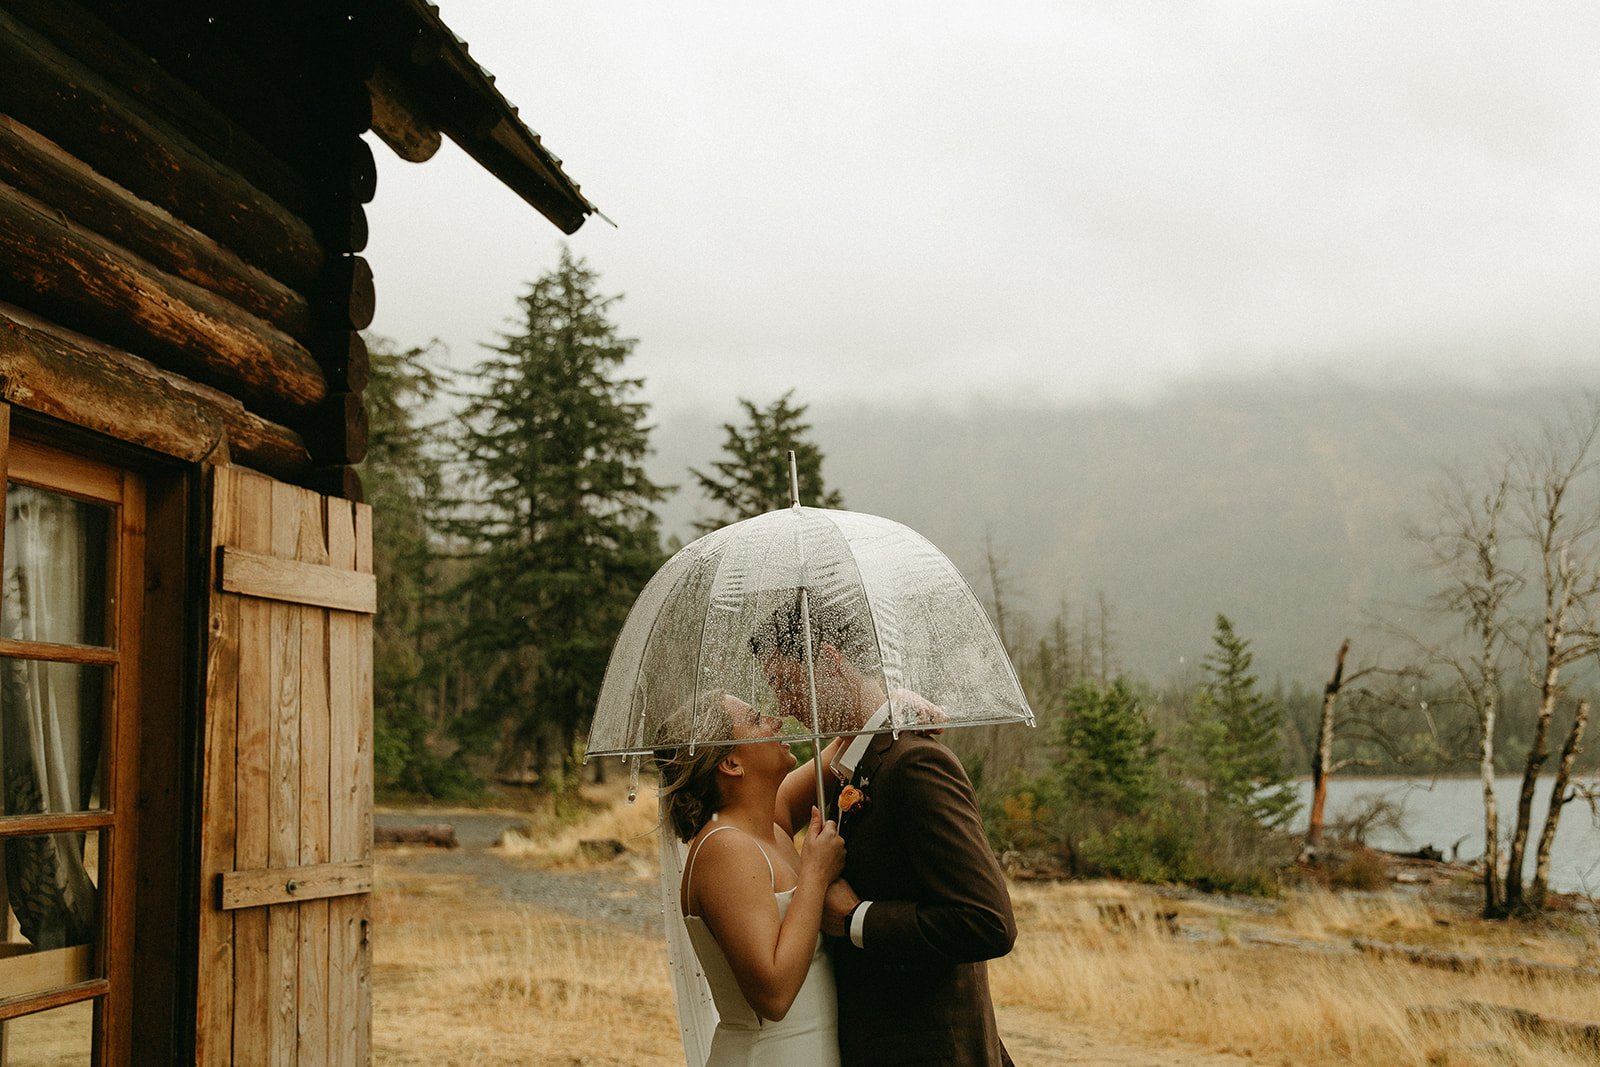 Bride and groom looking at one another under an umbrella